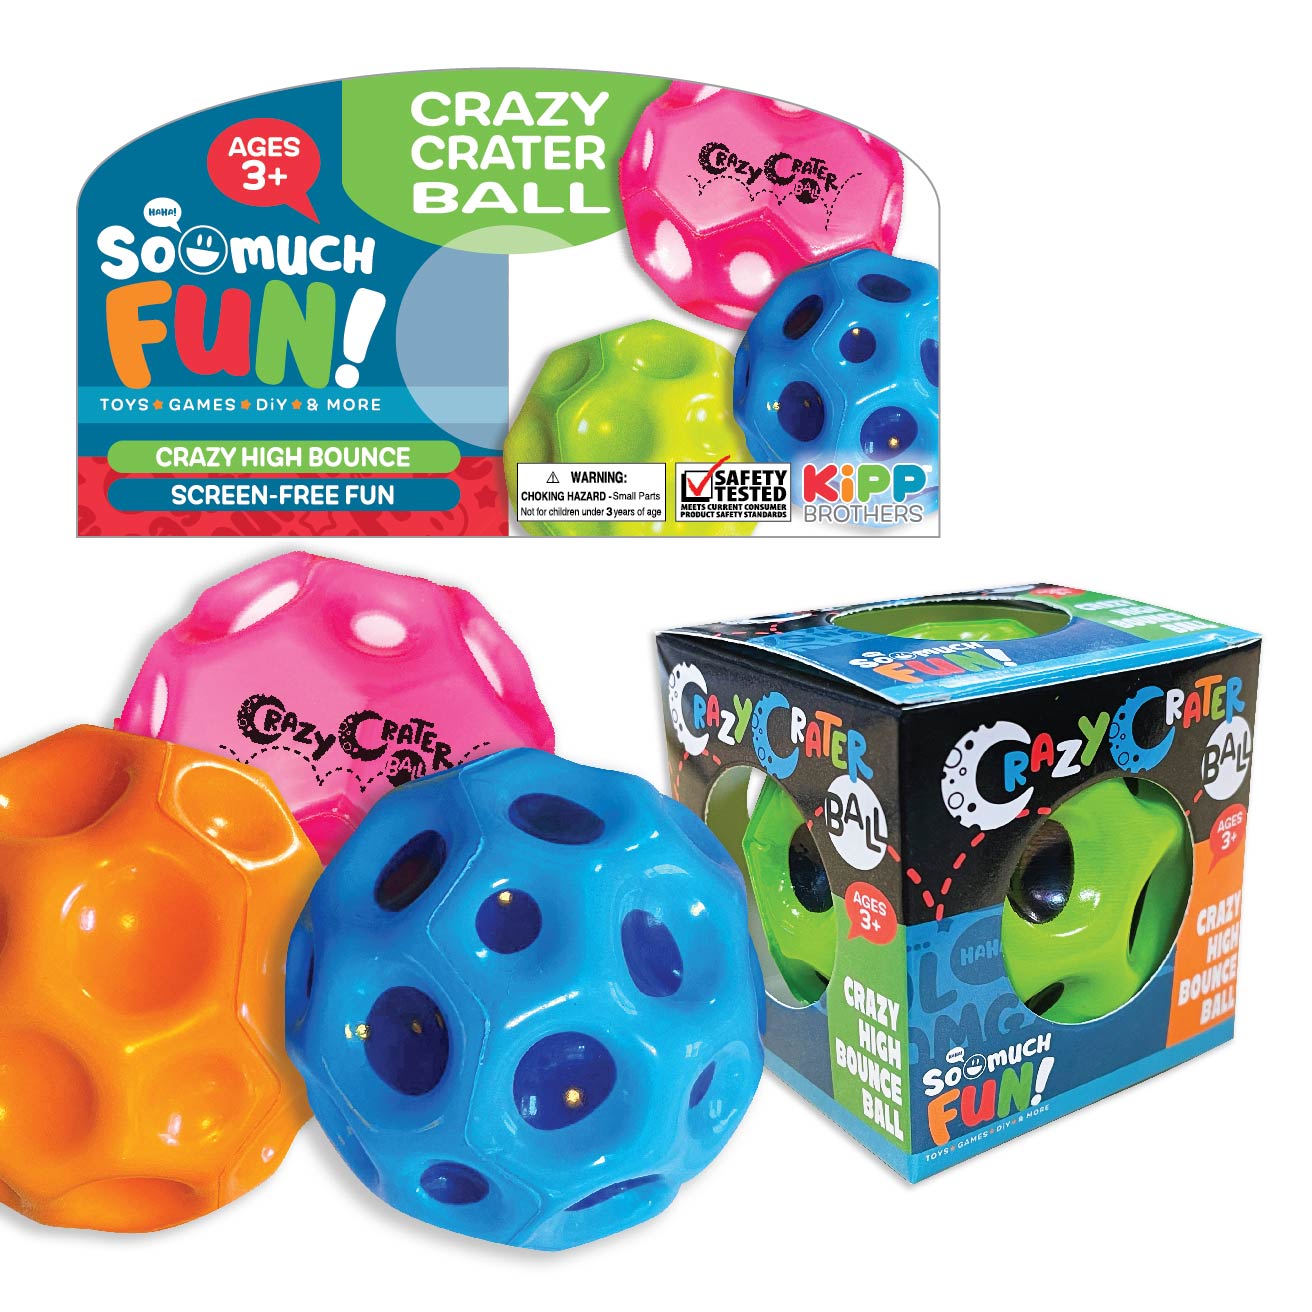 ITEM NUMBER 022929 CRAZY CRATER BOUNCE BALL 24 PIECES PER PACK